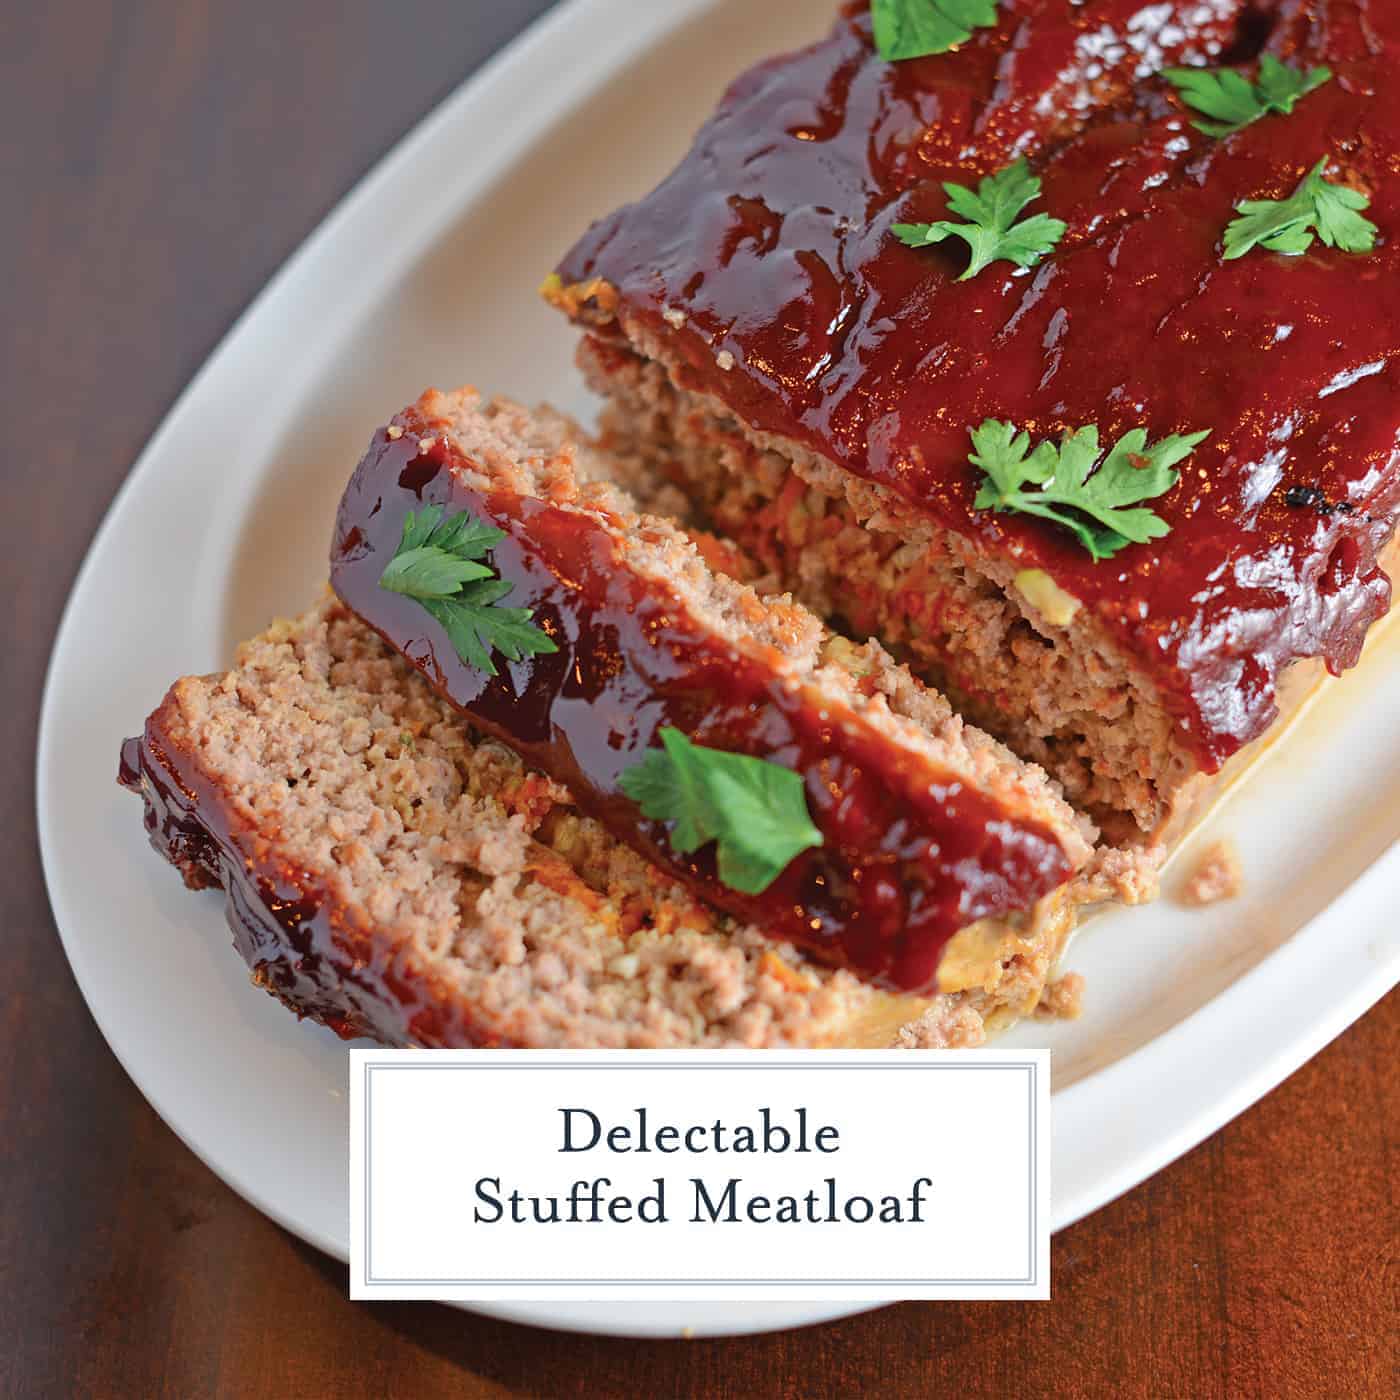 Stuffed Meatloaf is a tender meat mix stuffed with shredded vegetables and topped with a zesty and sweet sauce. The perfect comfort meal! #bestmeatloafrecipe #stuffedmeatloaf www.savoryexperiments.com 